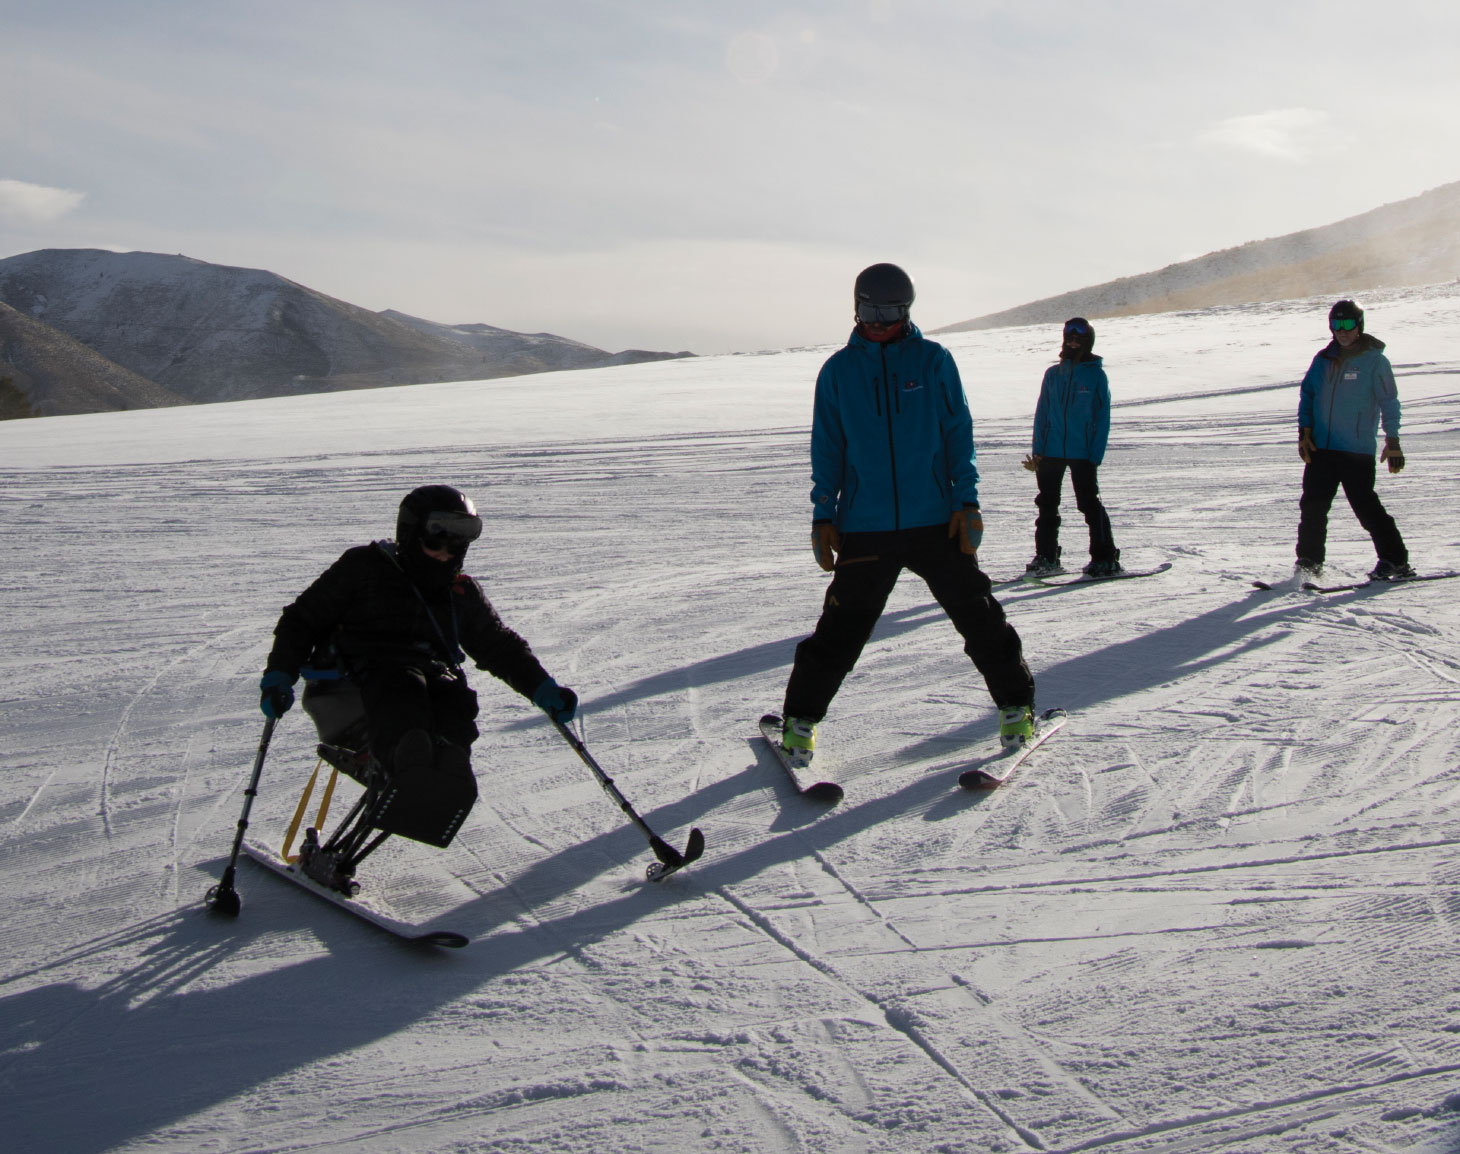 Skiers and snowboarders on sunny slope